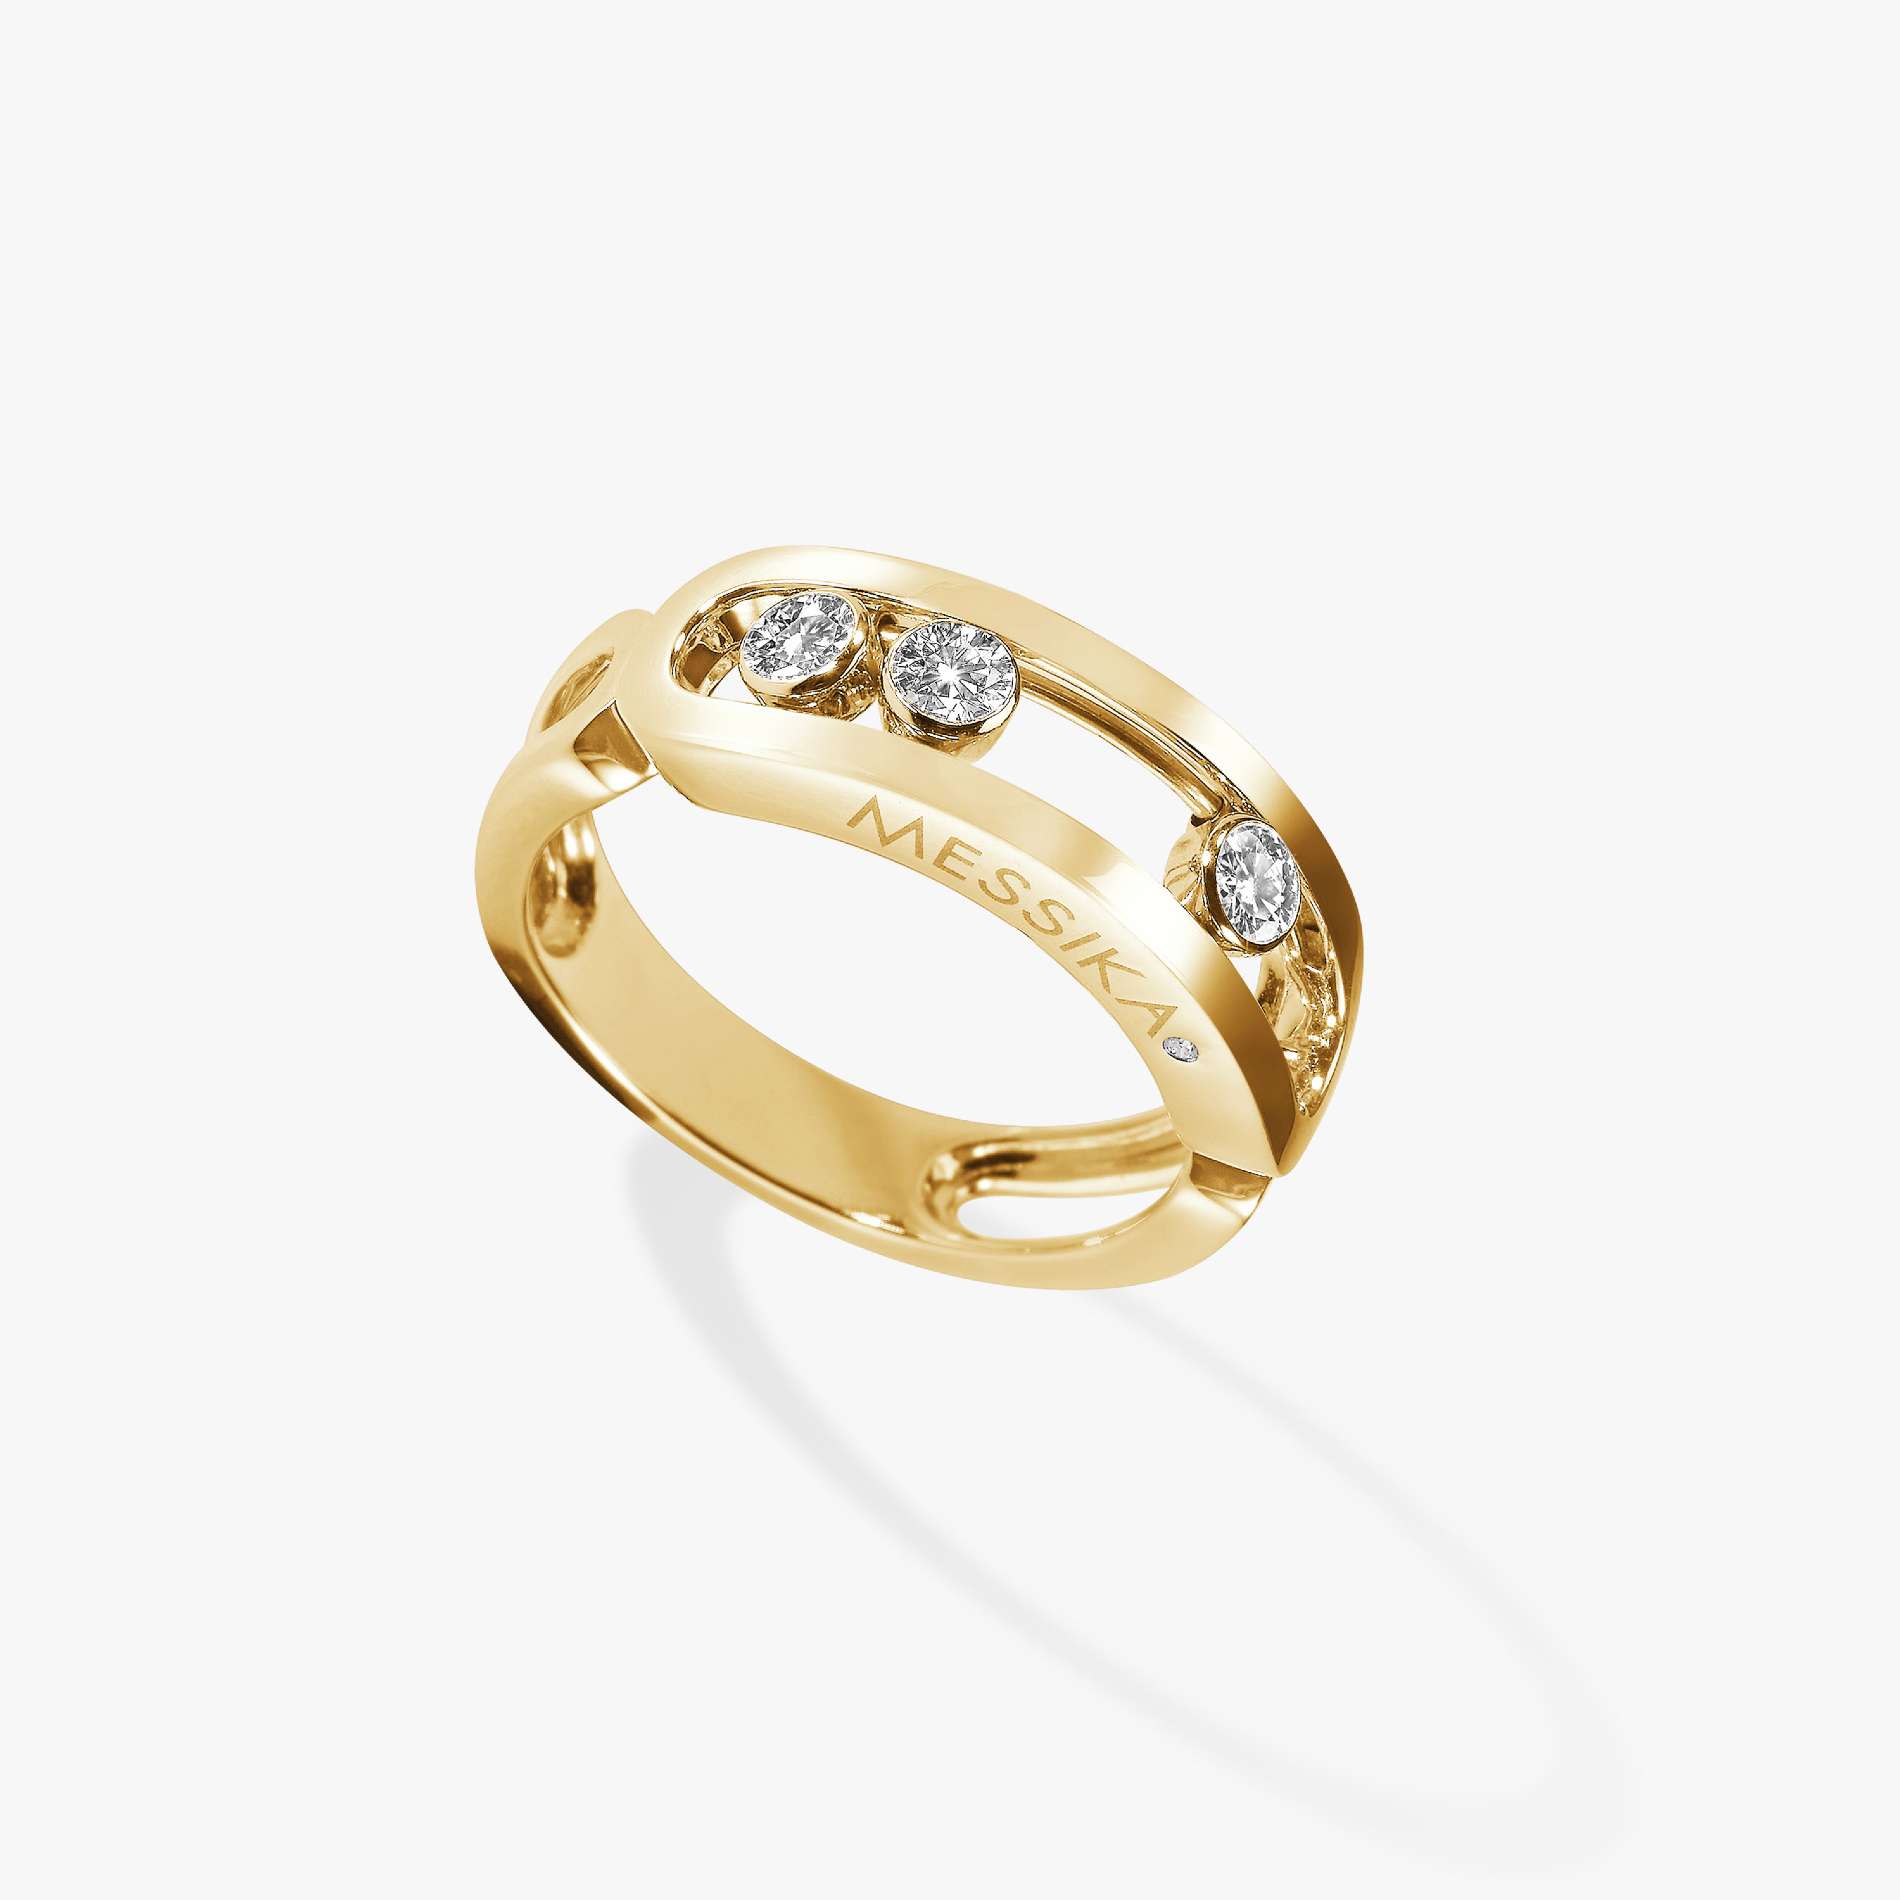 Move Classique Yellow Gold For Her Diamond Ring 03998-YG